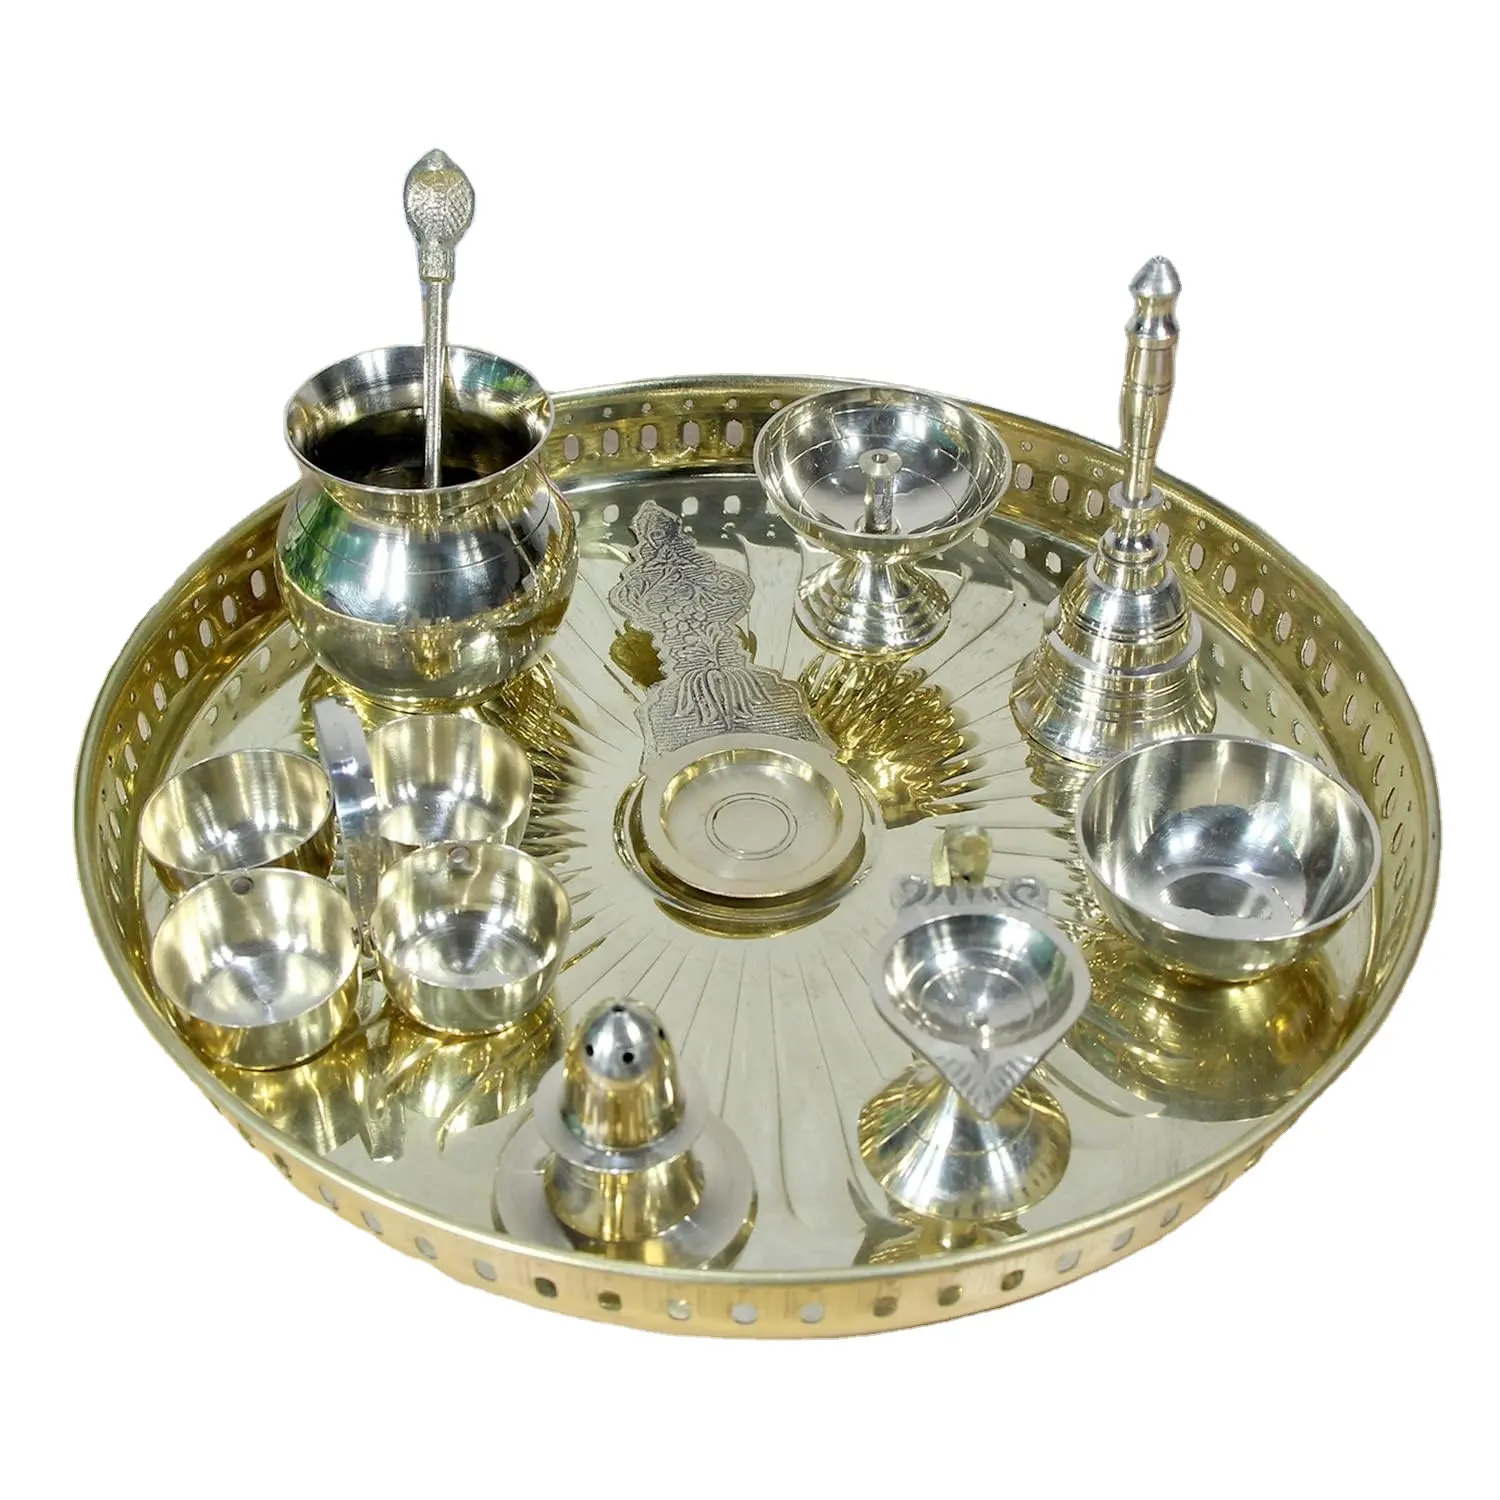 Pooja Thali Set Festival Ethnic Puja Thali Silver Finished Items For Diwali Daily Home temple Office Wedding Return Gift